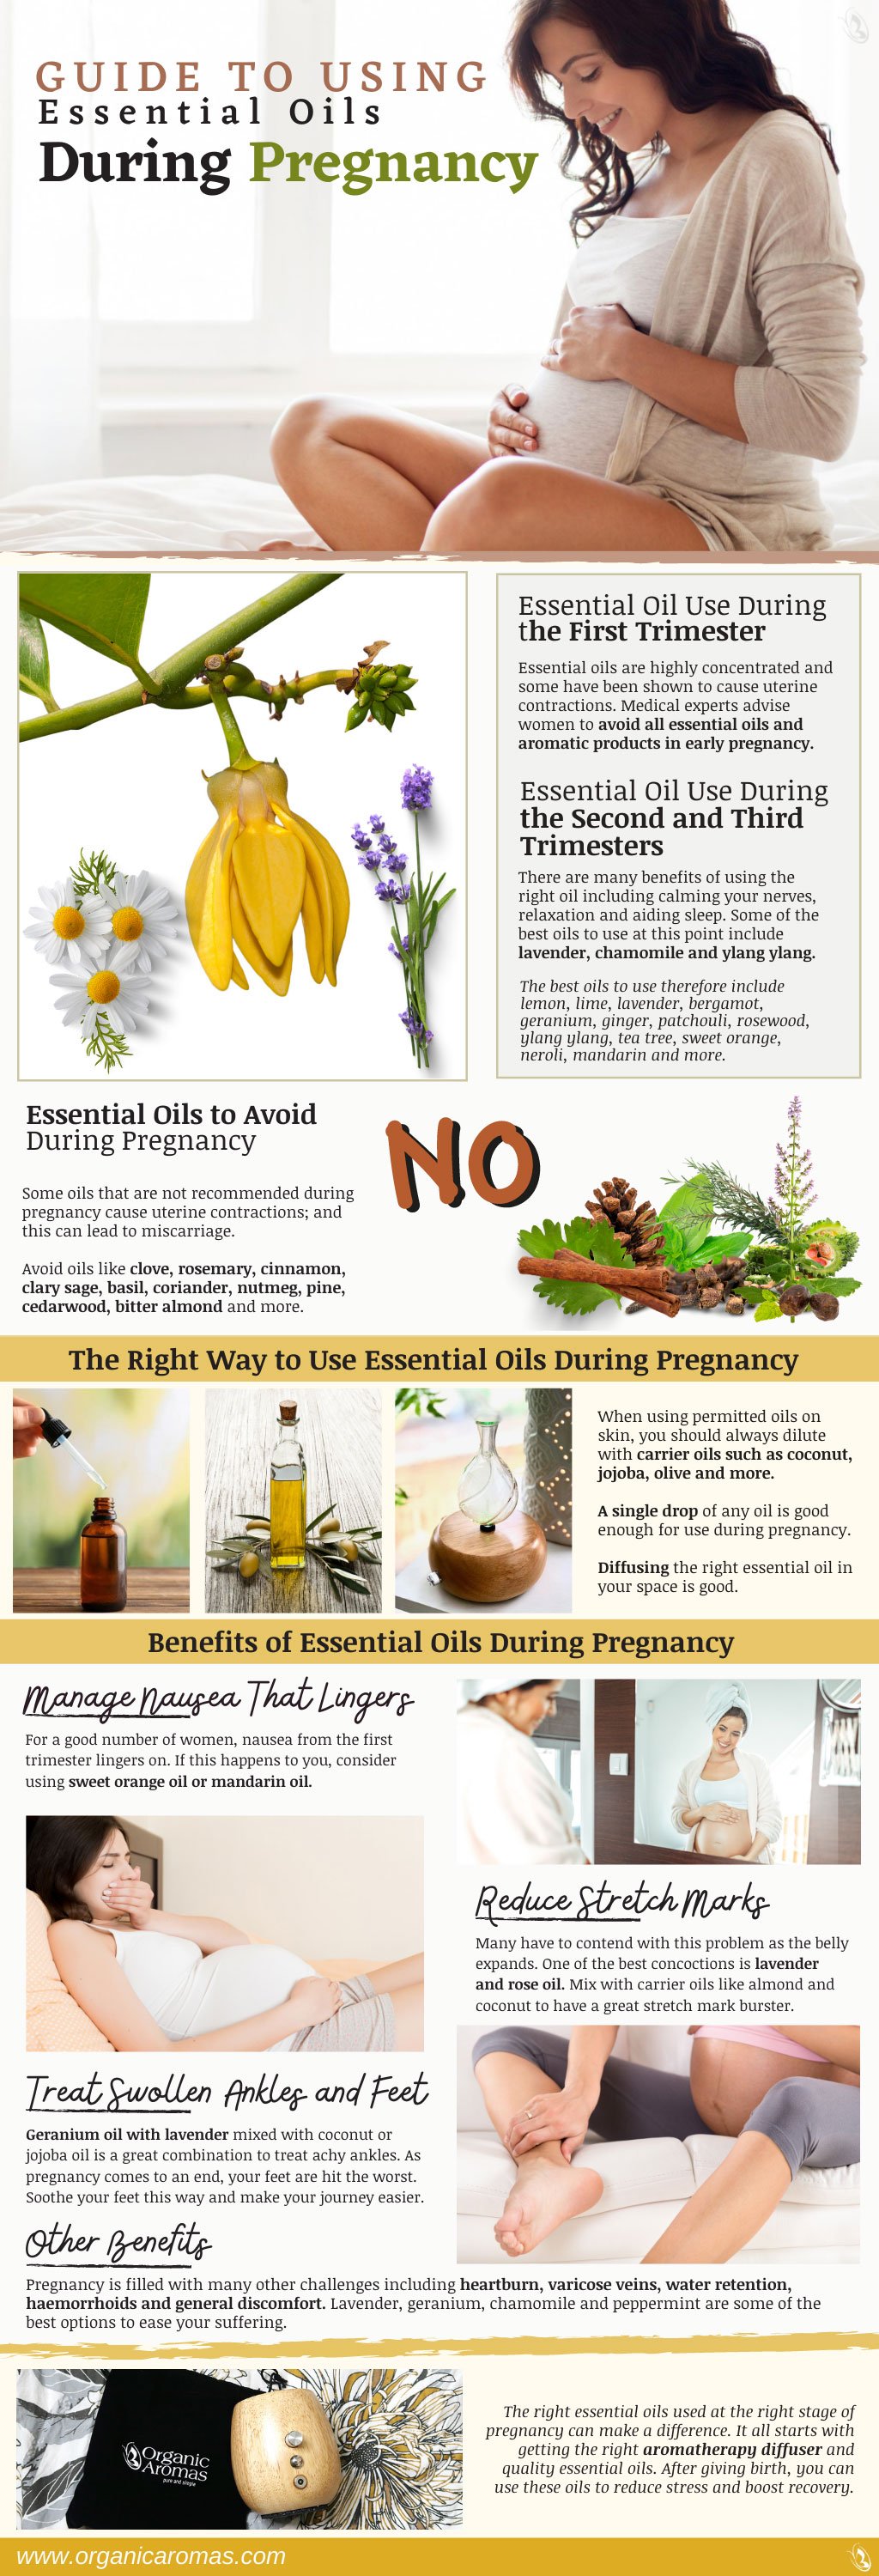 A Guide to Essential Oils in Pregnancy